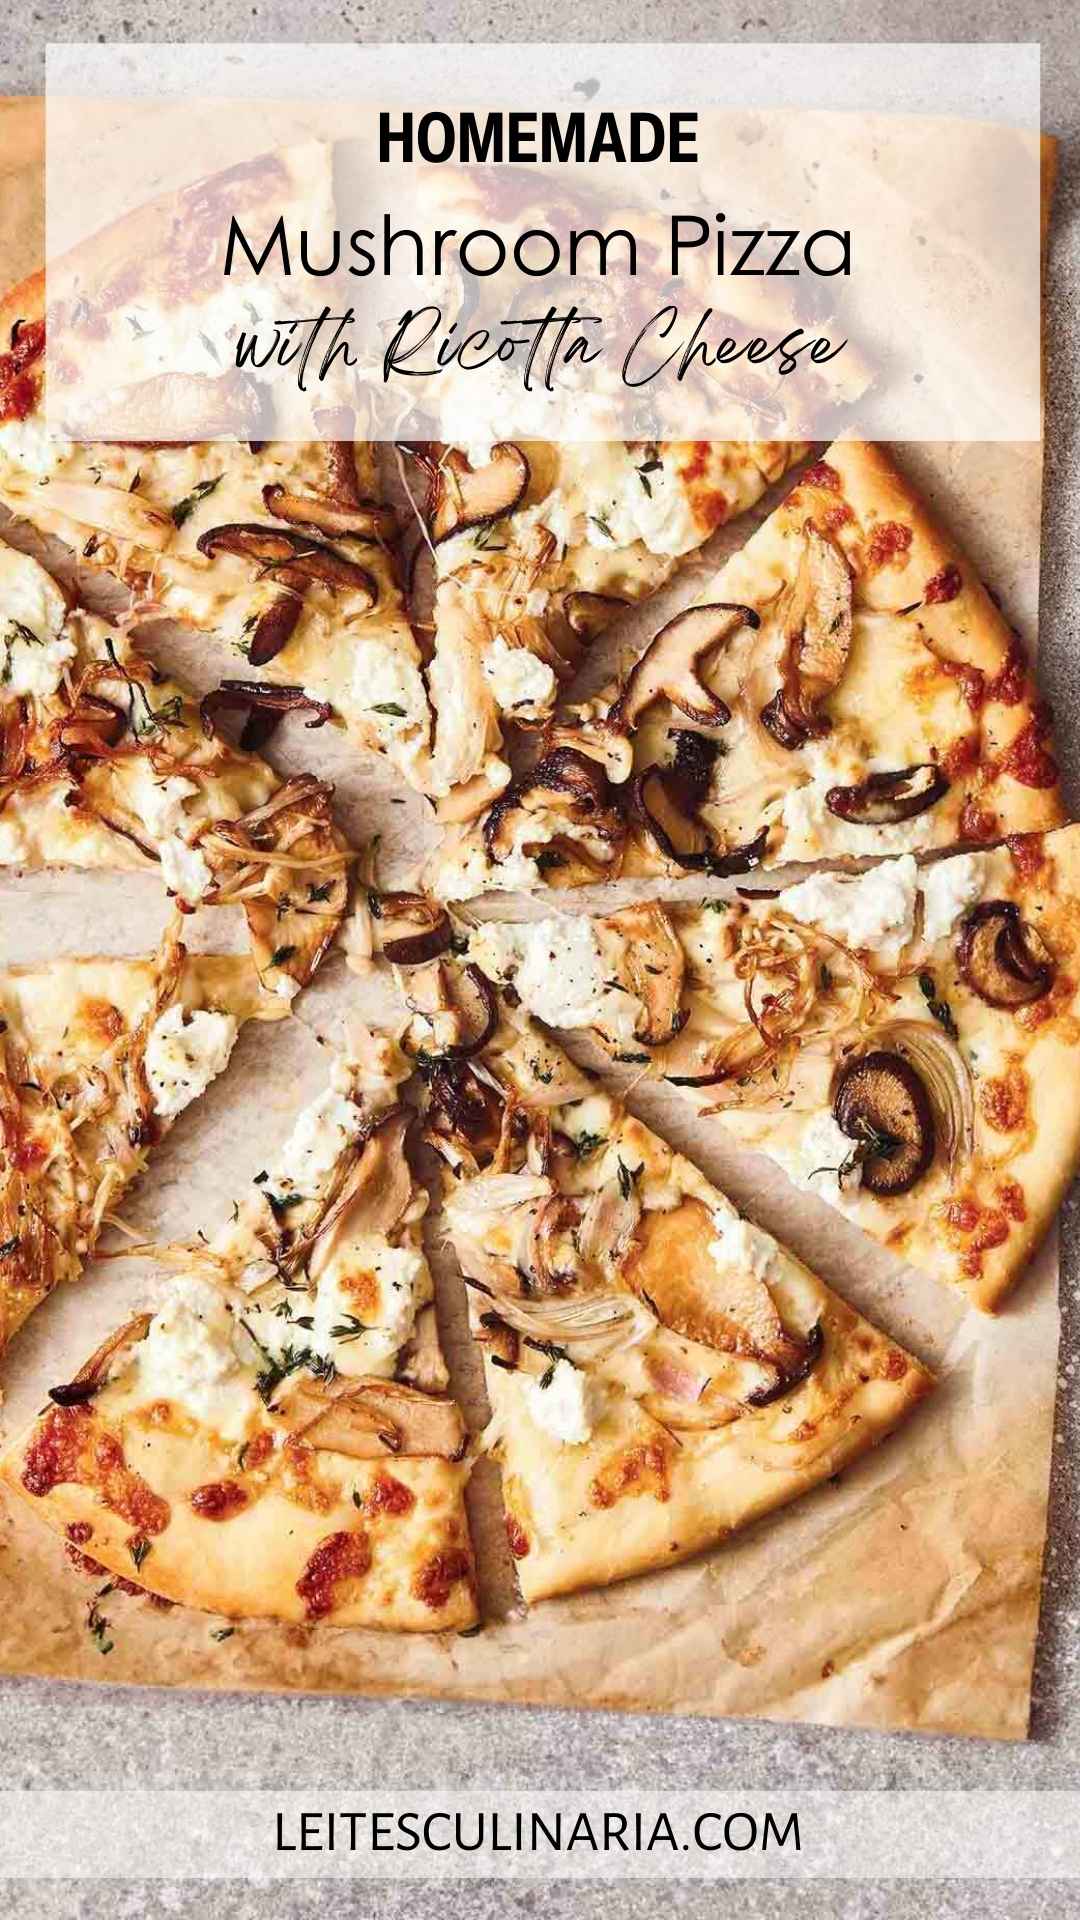 A whole mushroom pizza with ricotta sliced into eight pieces on a sheet of parchment paper.